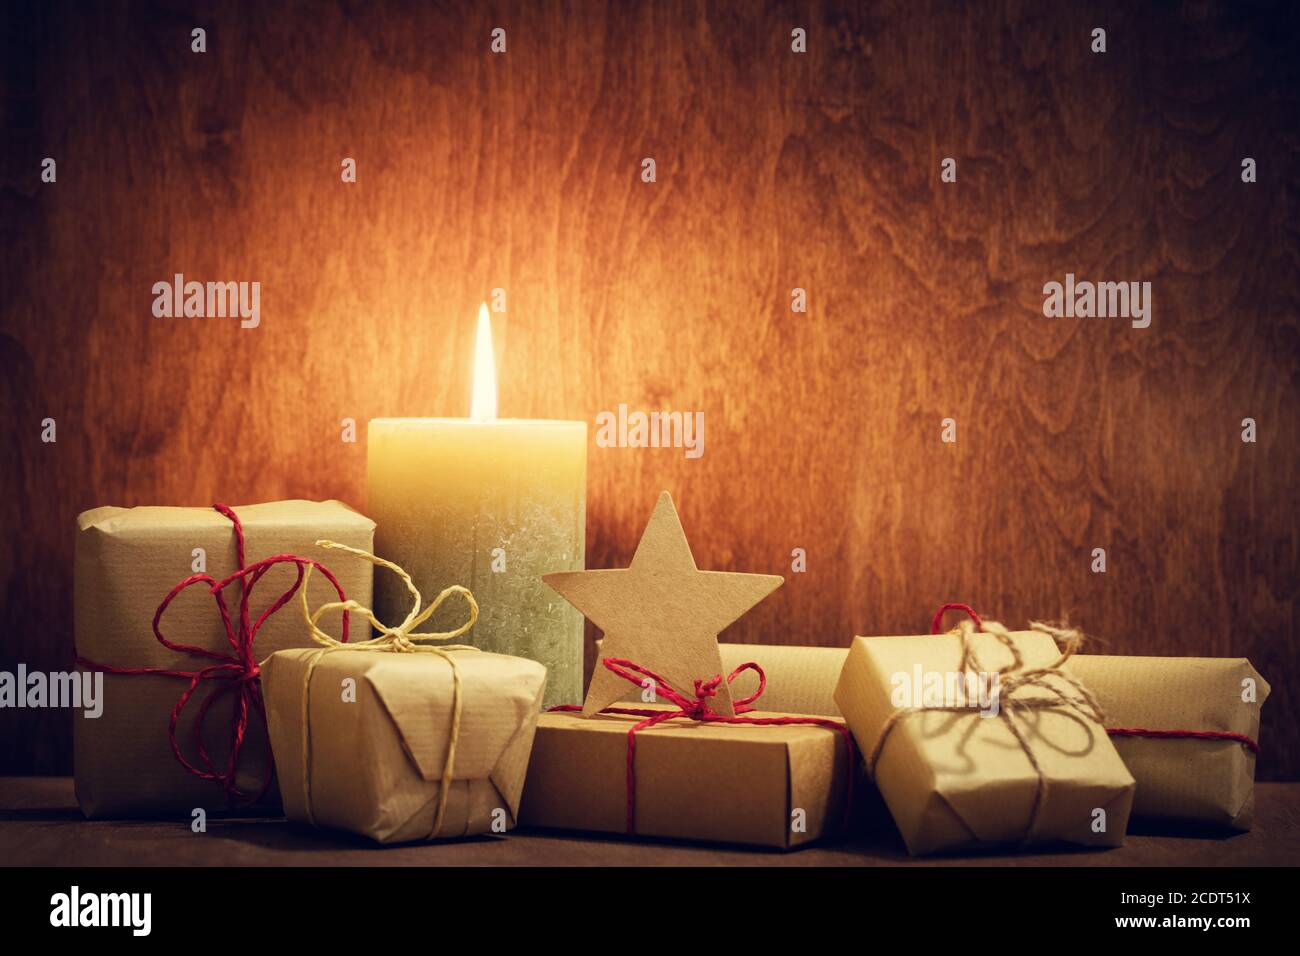 Chistmas presents, gifts with a candle glowing on wooden wall background. Stock Photo